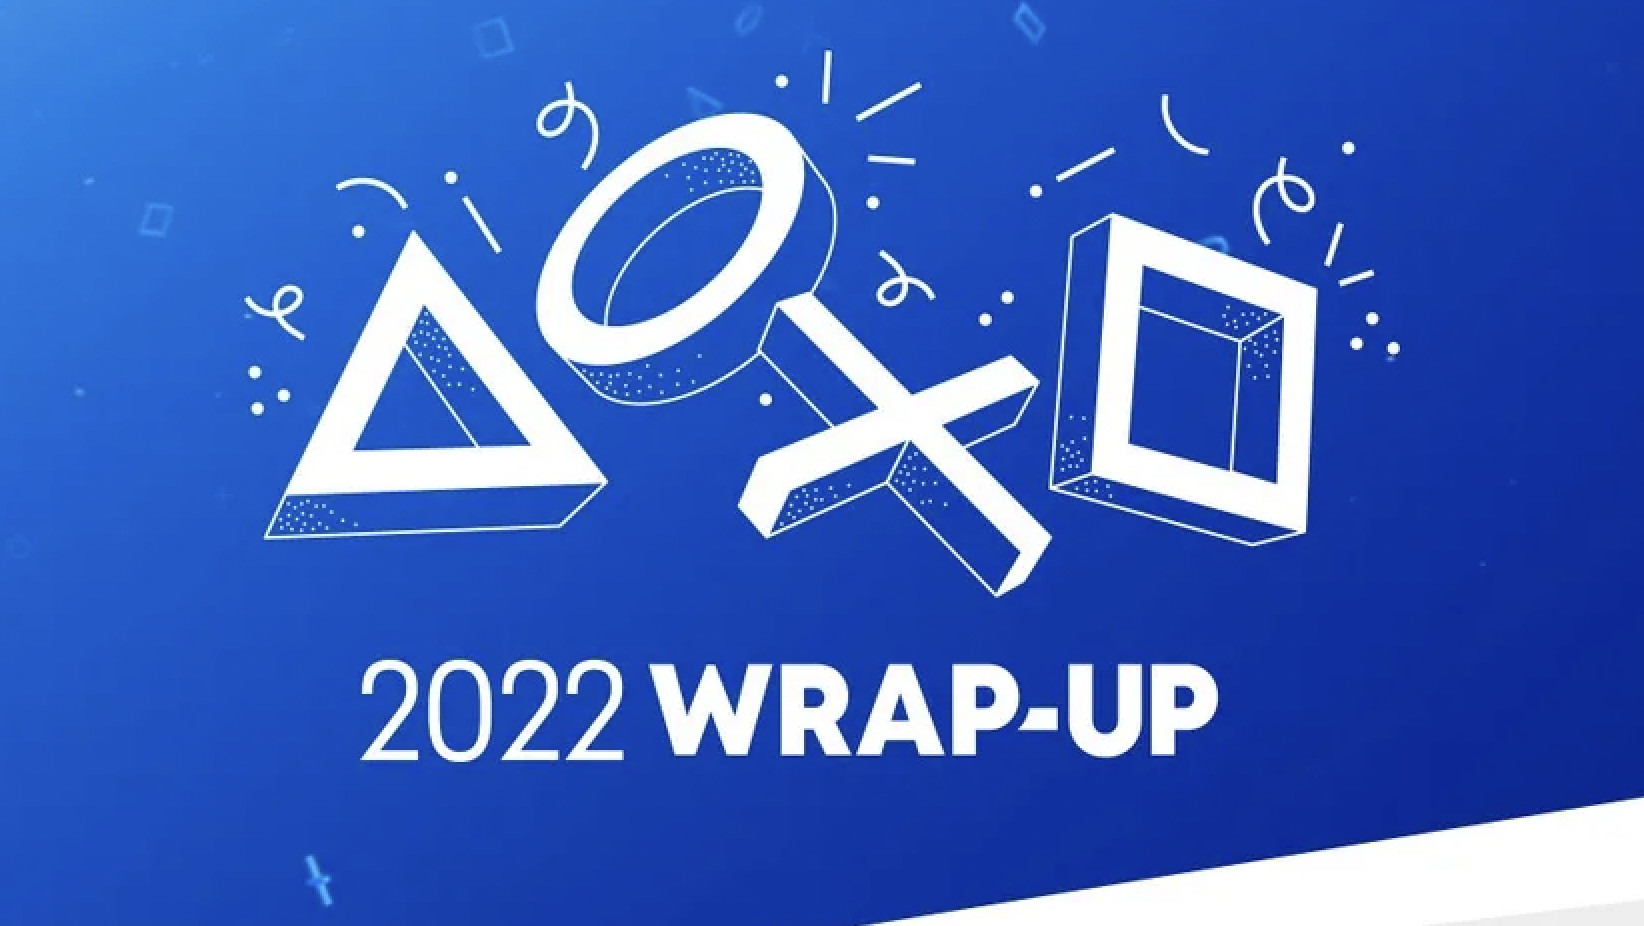 PlayStation 2022 Wrap-Up for PS4 and PS5 Games Appears